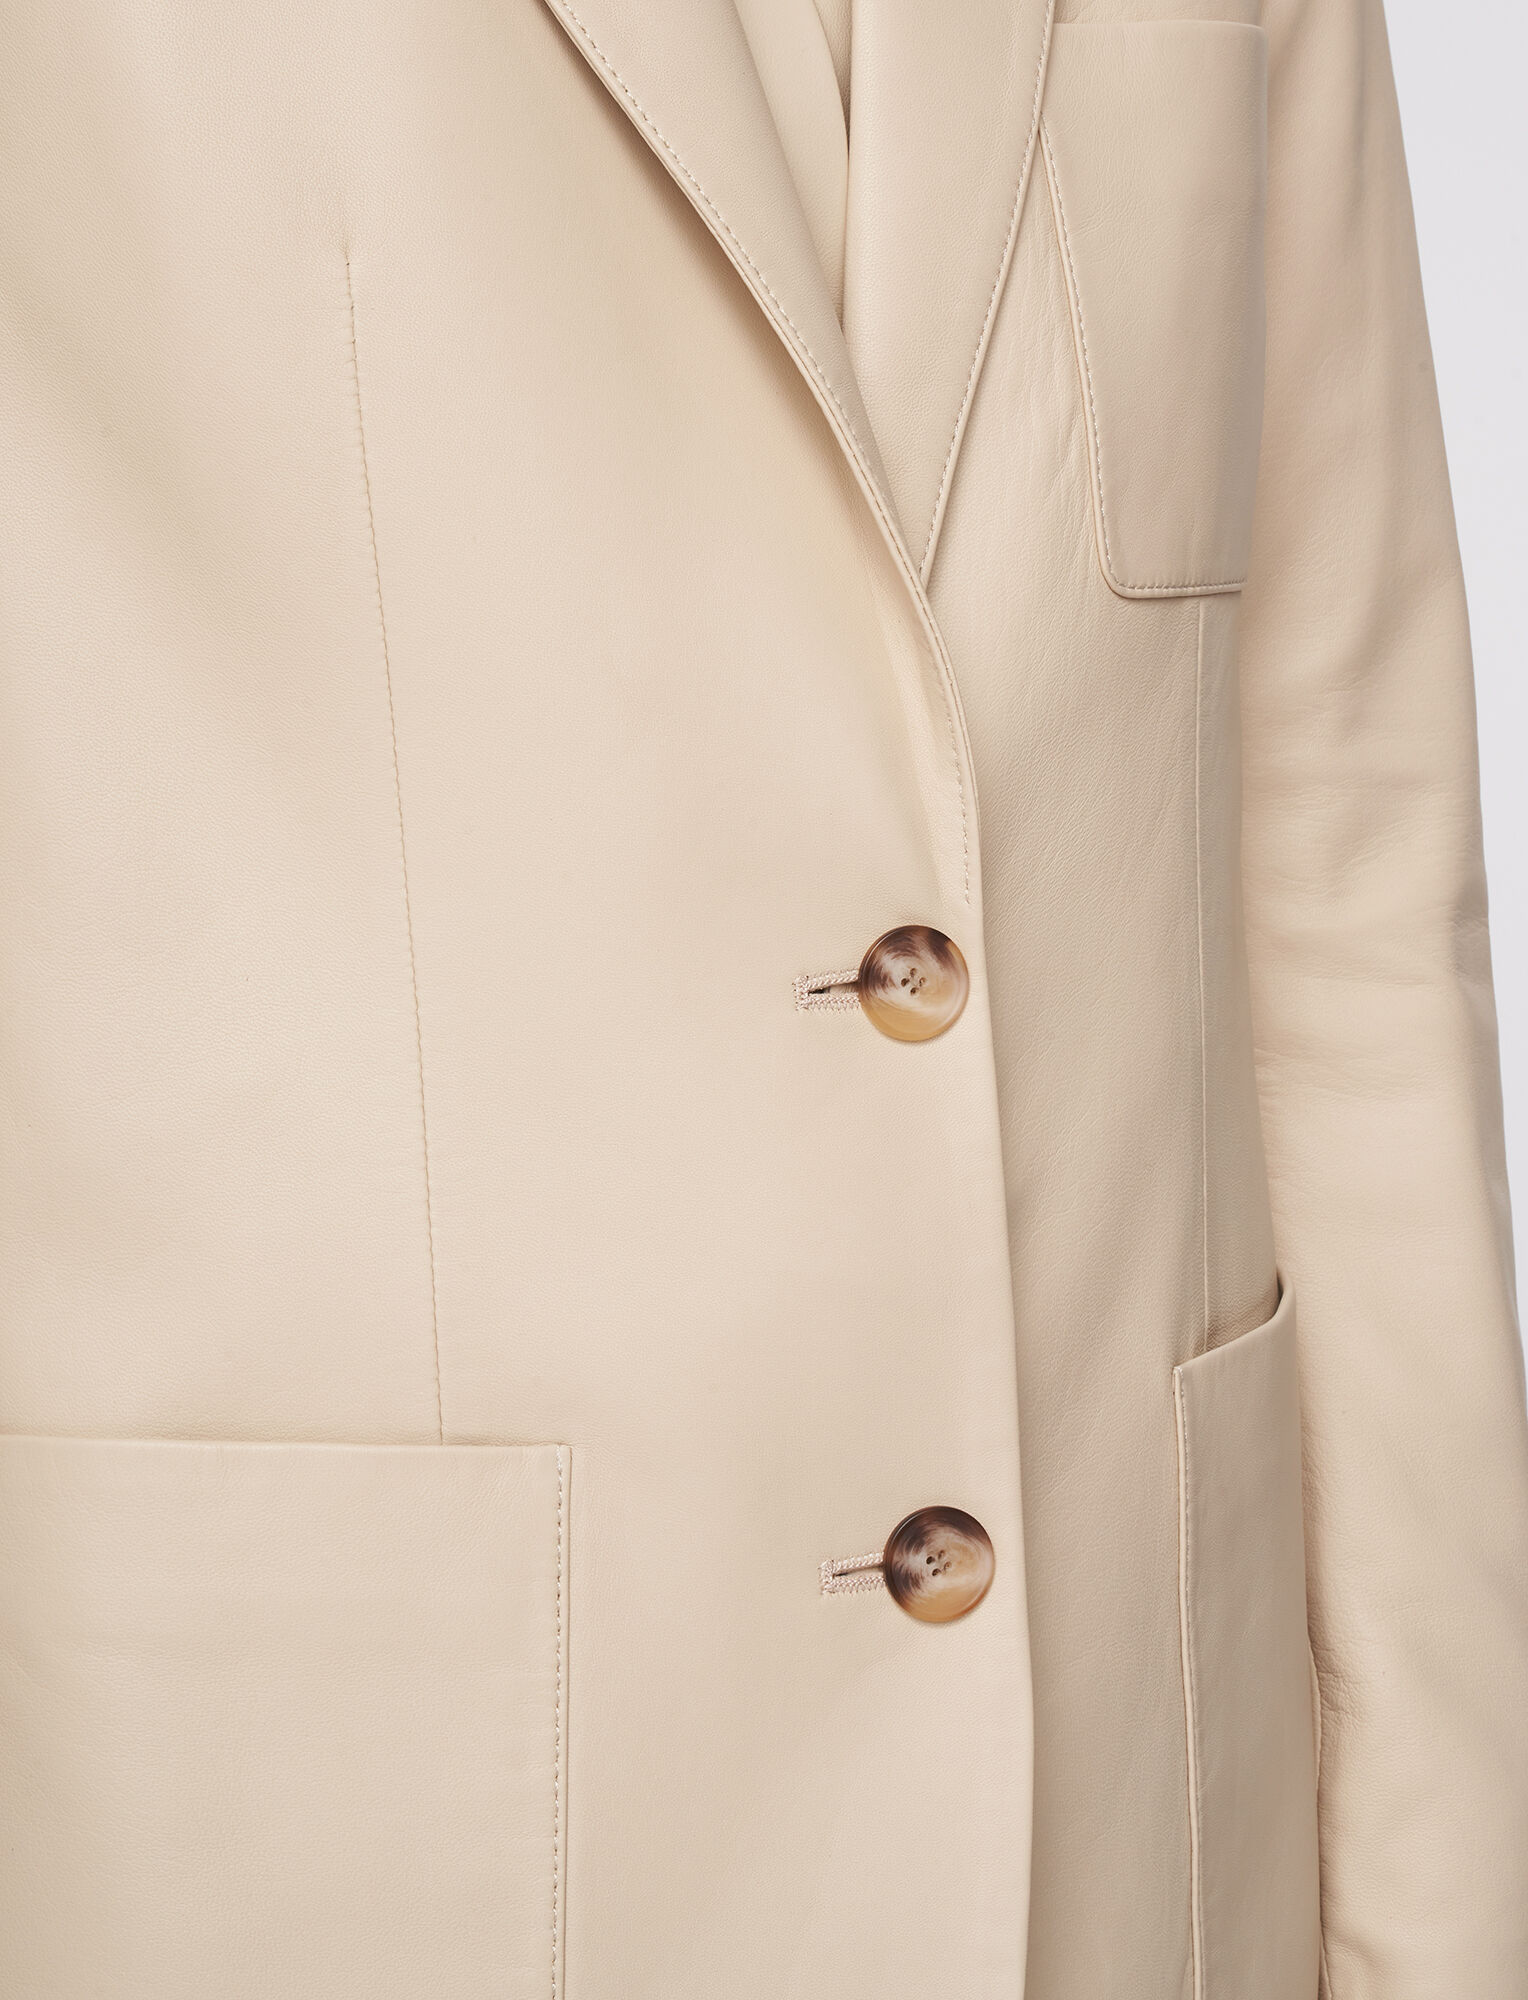 Joseph, Nappa Leather Jacques Tailored Jacket, in Chai